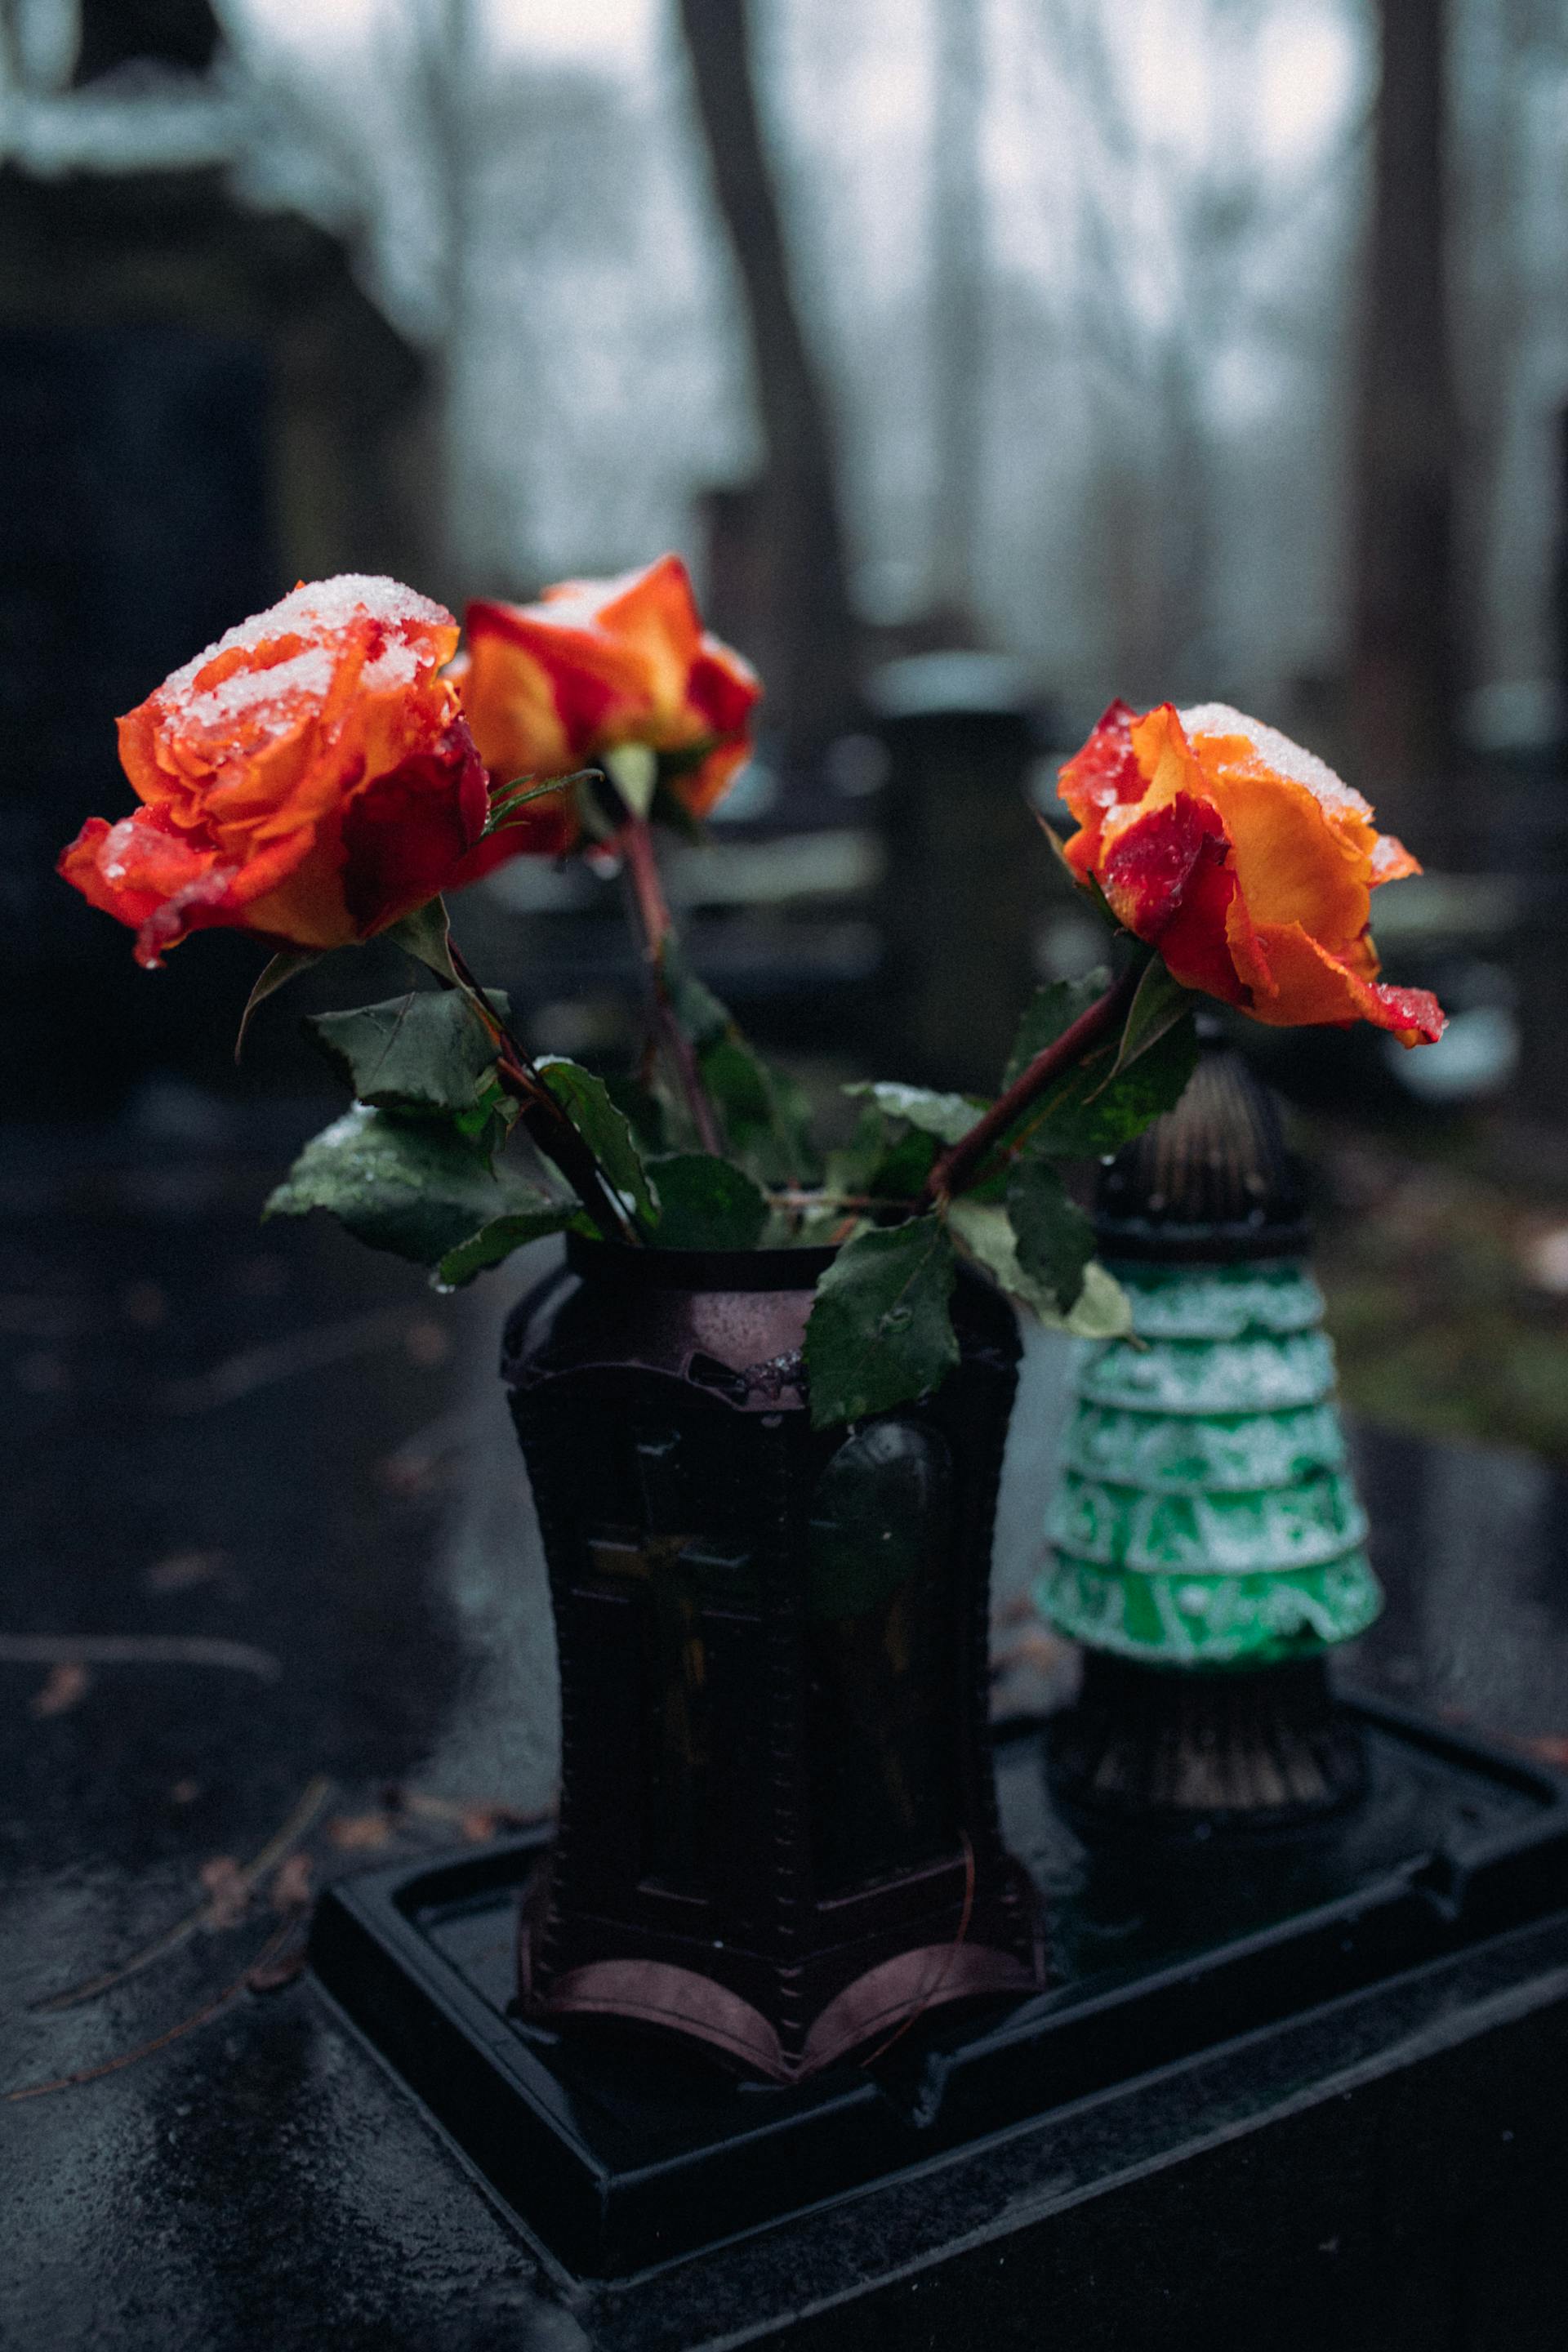 Flowers on a grave | Source: Pexels